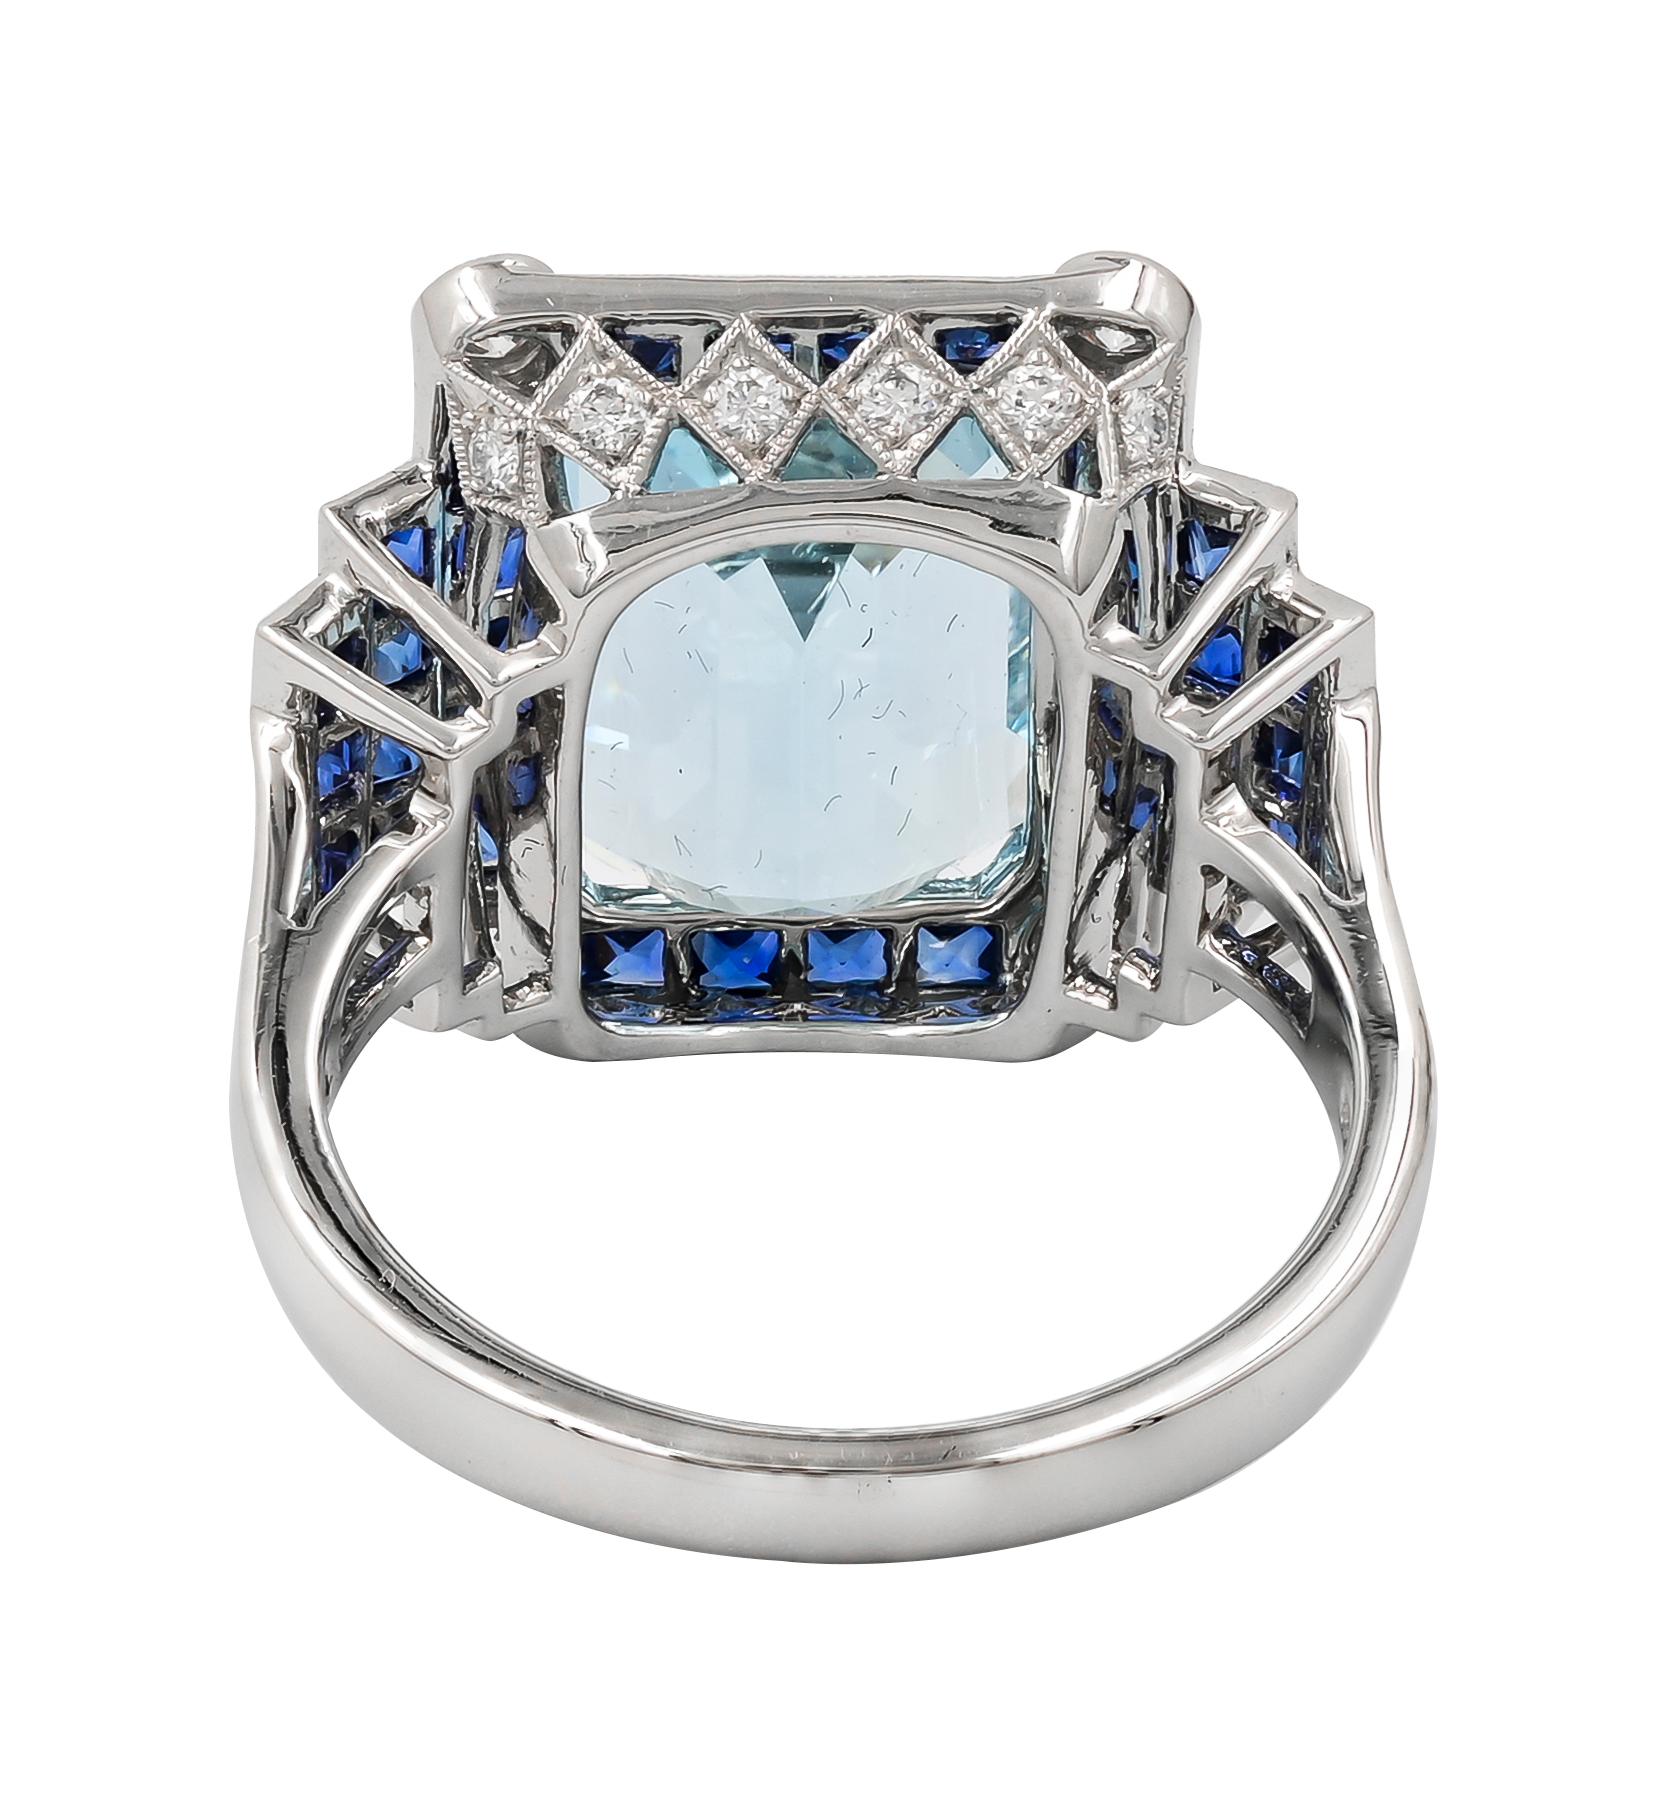 Sophia D. 5.46 Carat Aquamarine with Blue Sapphires and Diamonds Art Deco Ring In New Condition For Sale In New York, NY